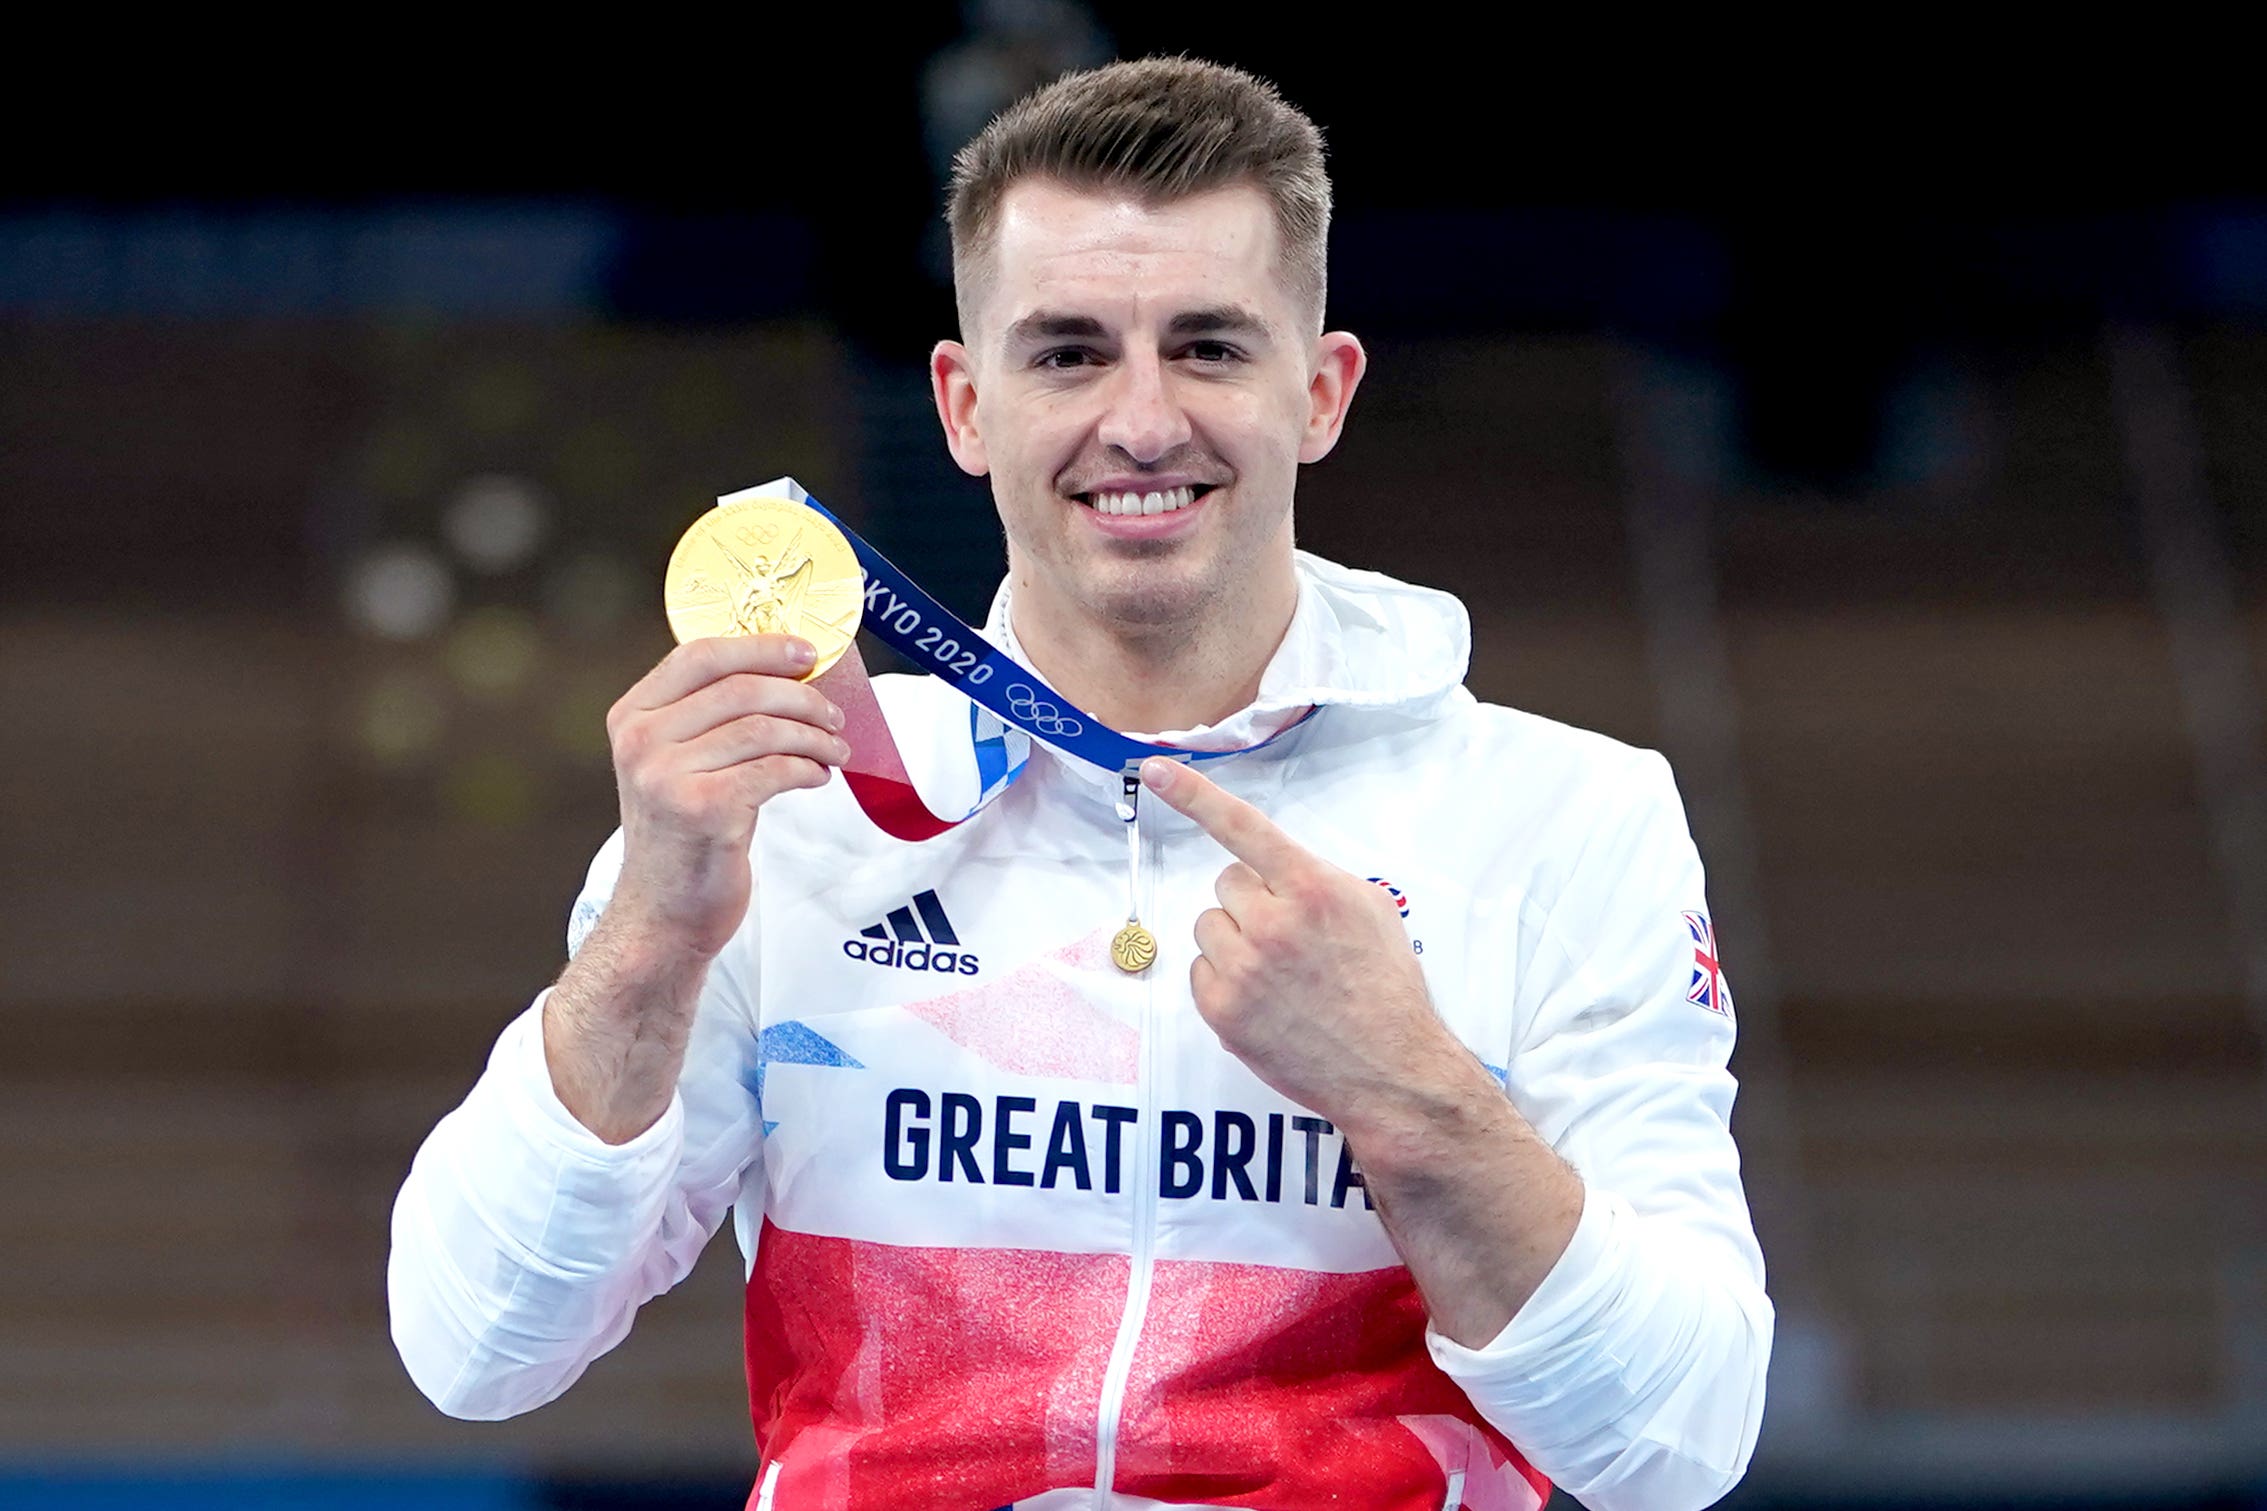 Max Whitlock is targeting a fourth world gold medal in Antwerp